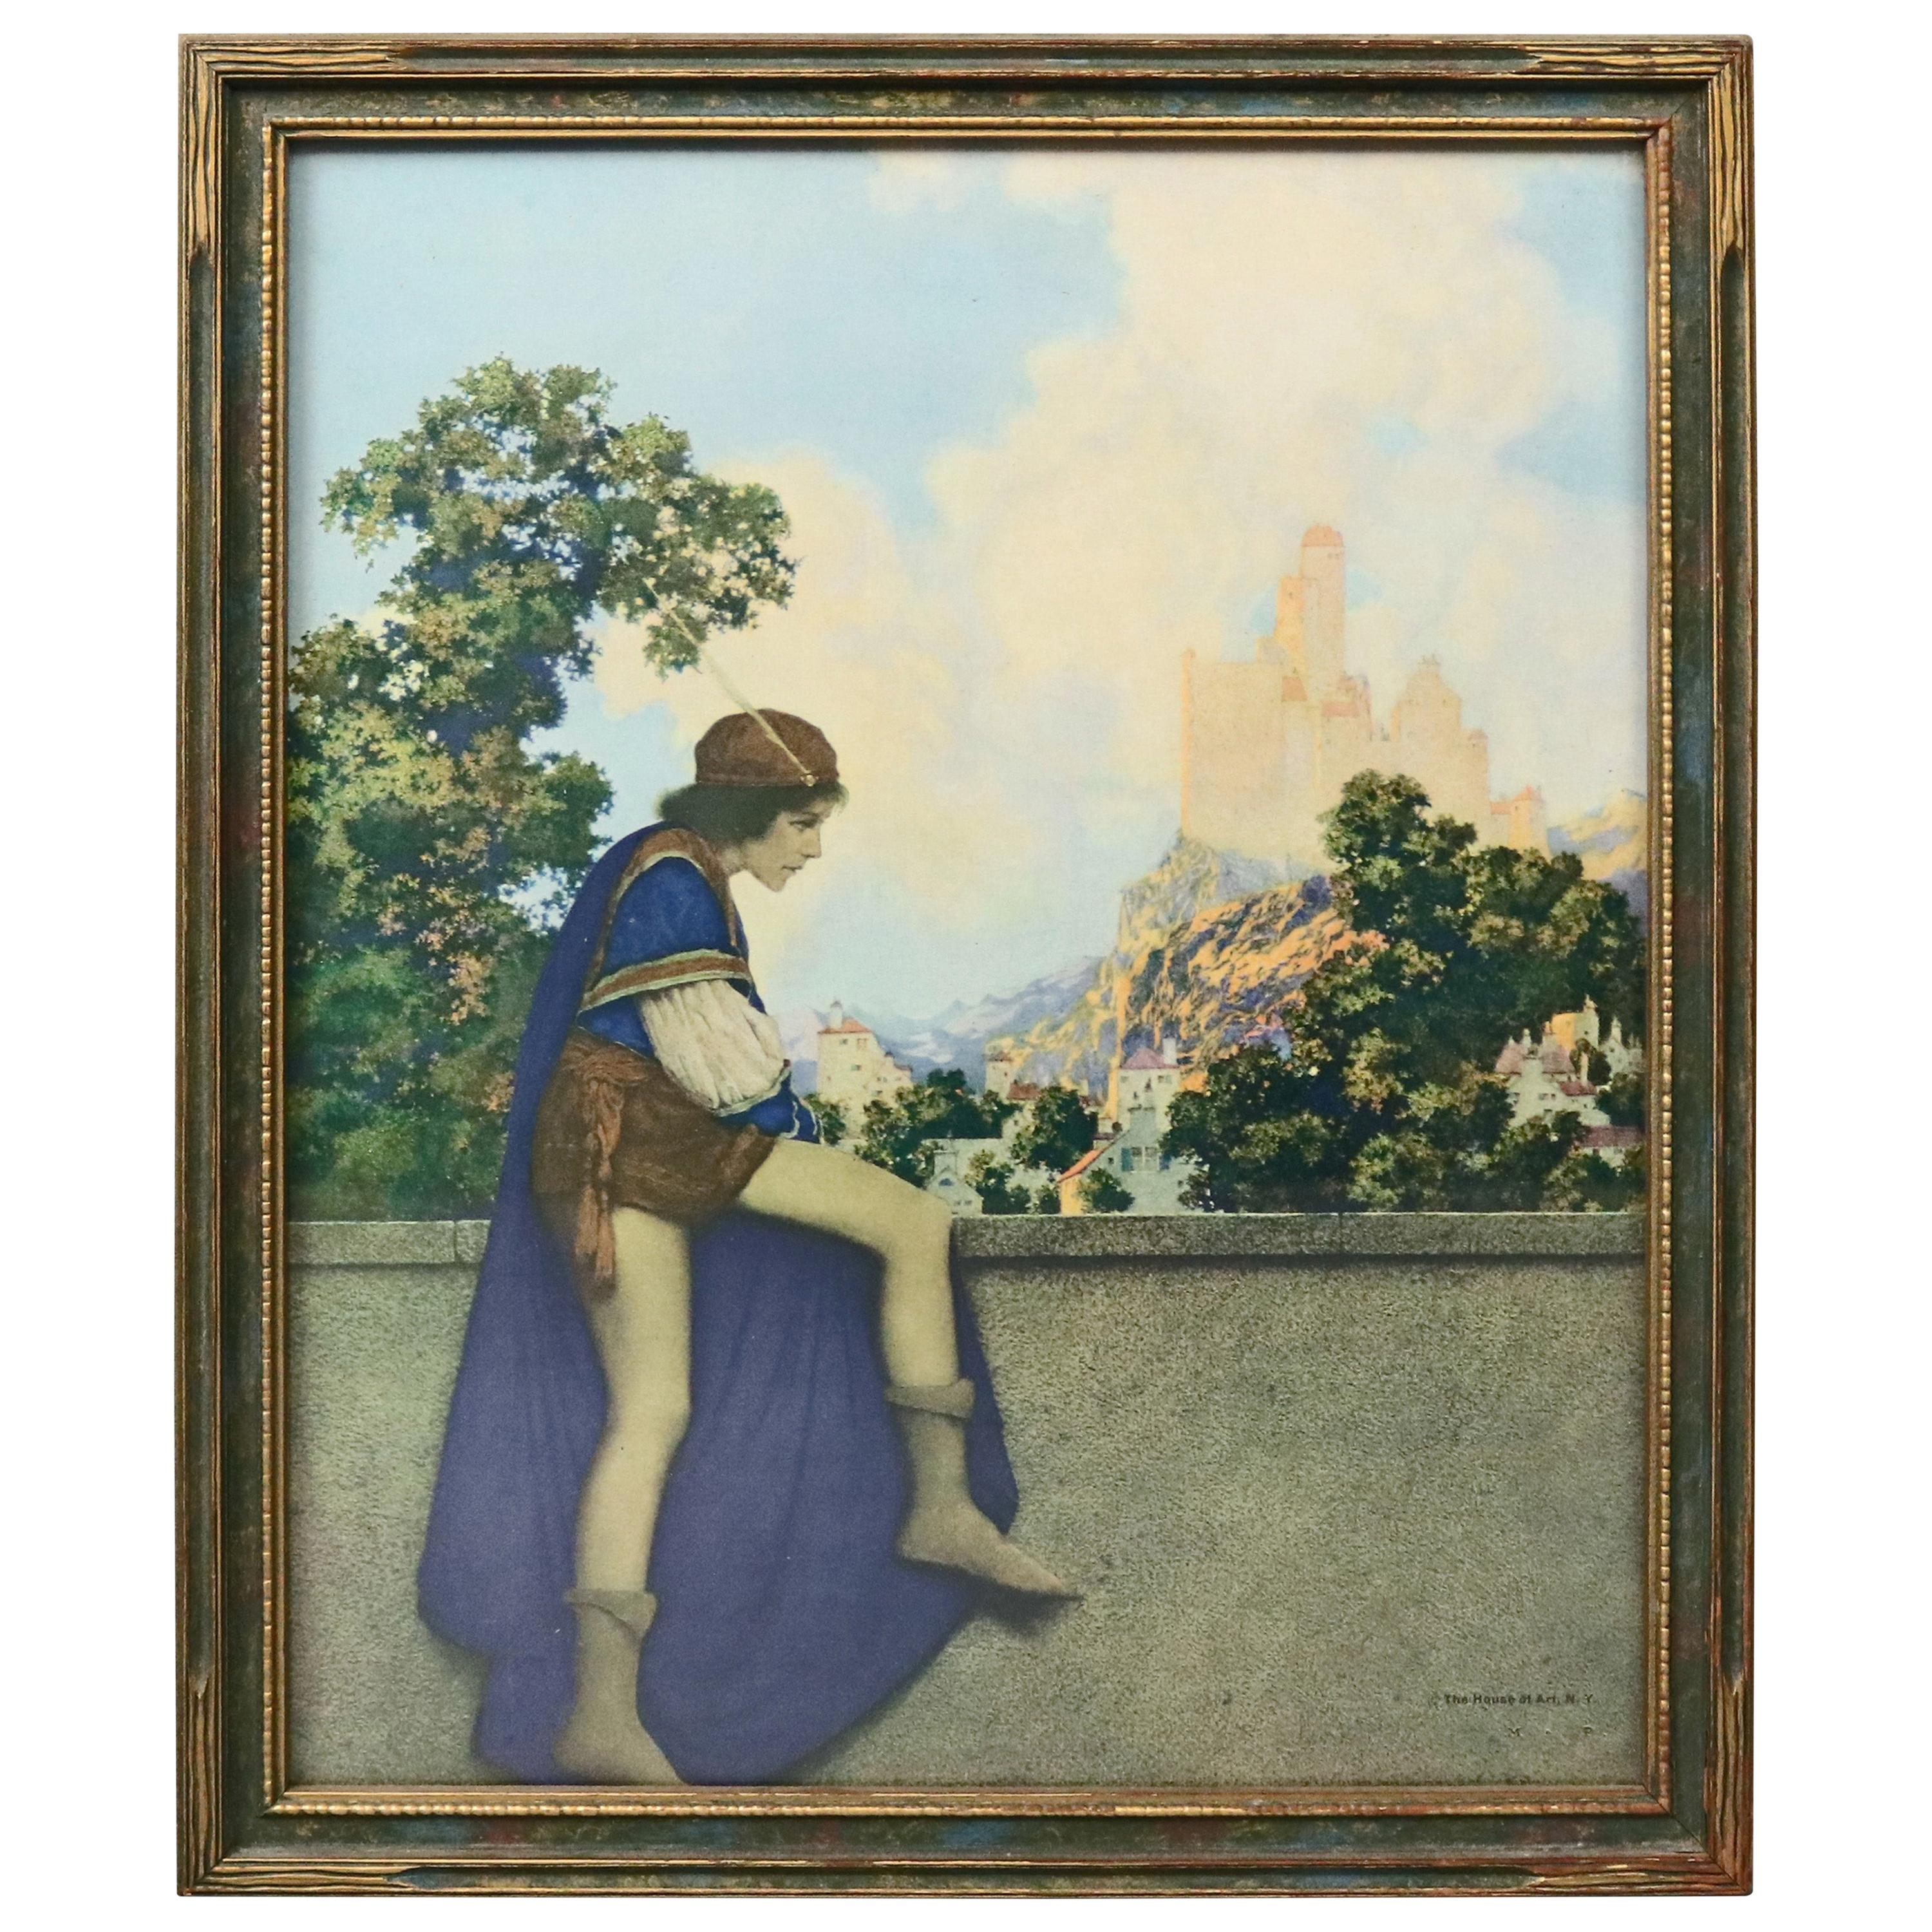 Art Deco Antique Print 'The Prince' after Original by Maxfield Parrish, Framed